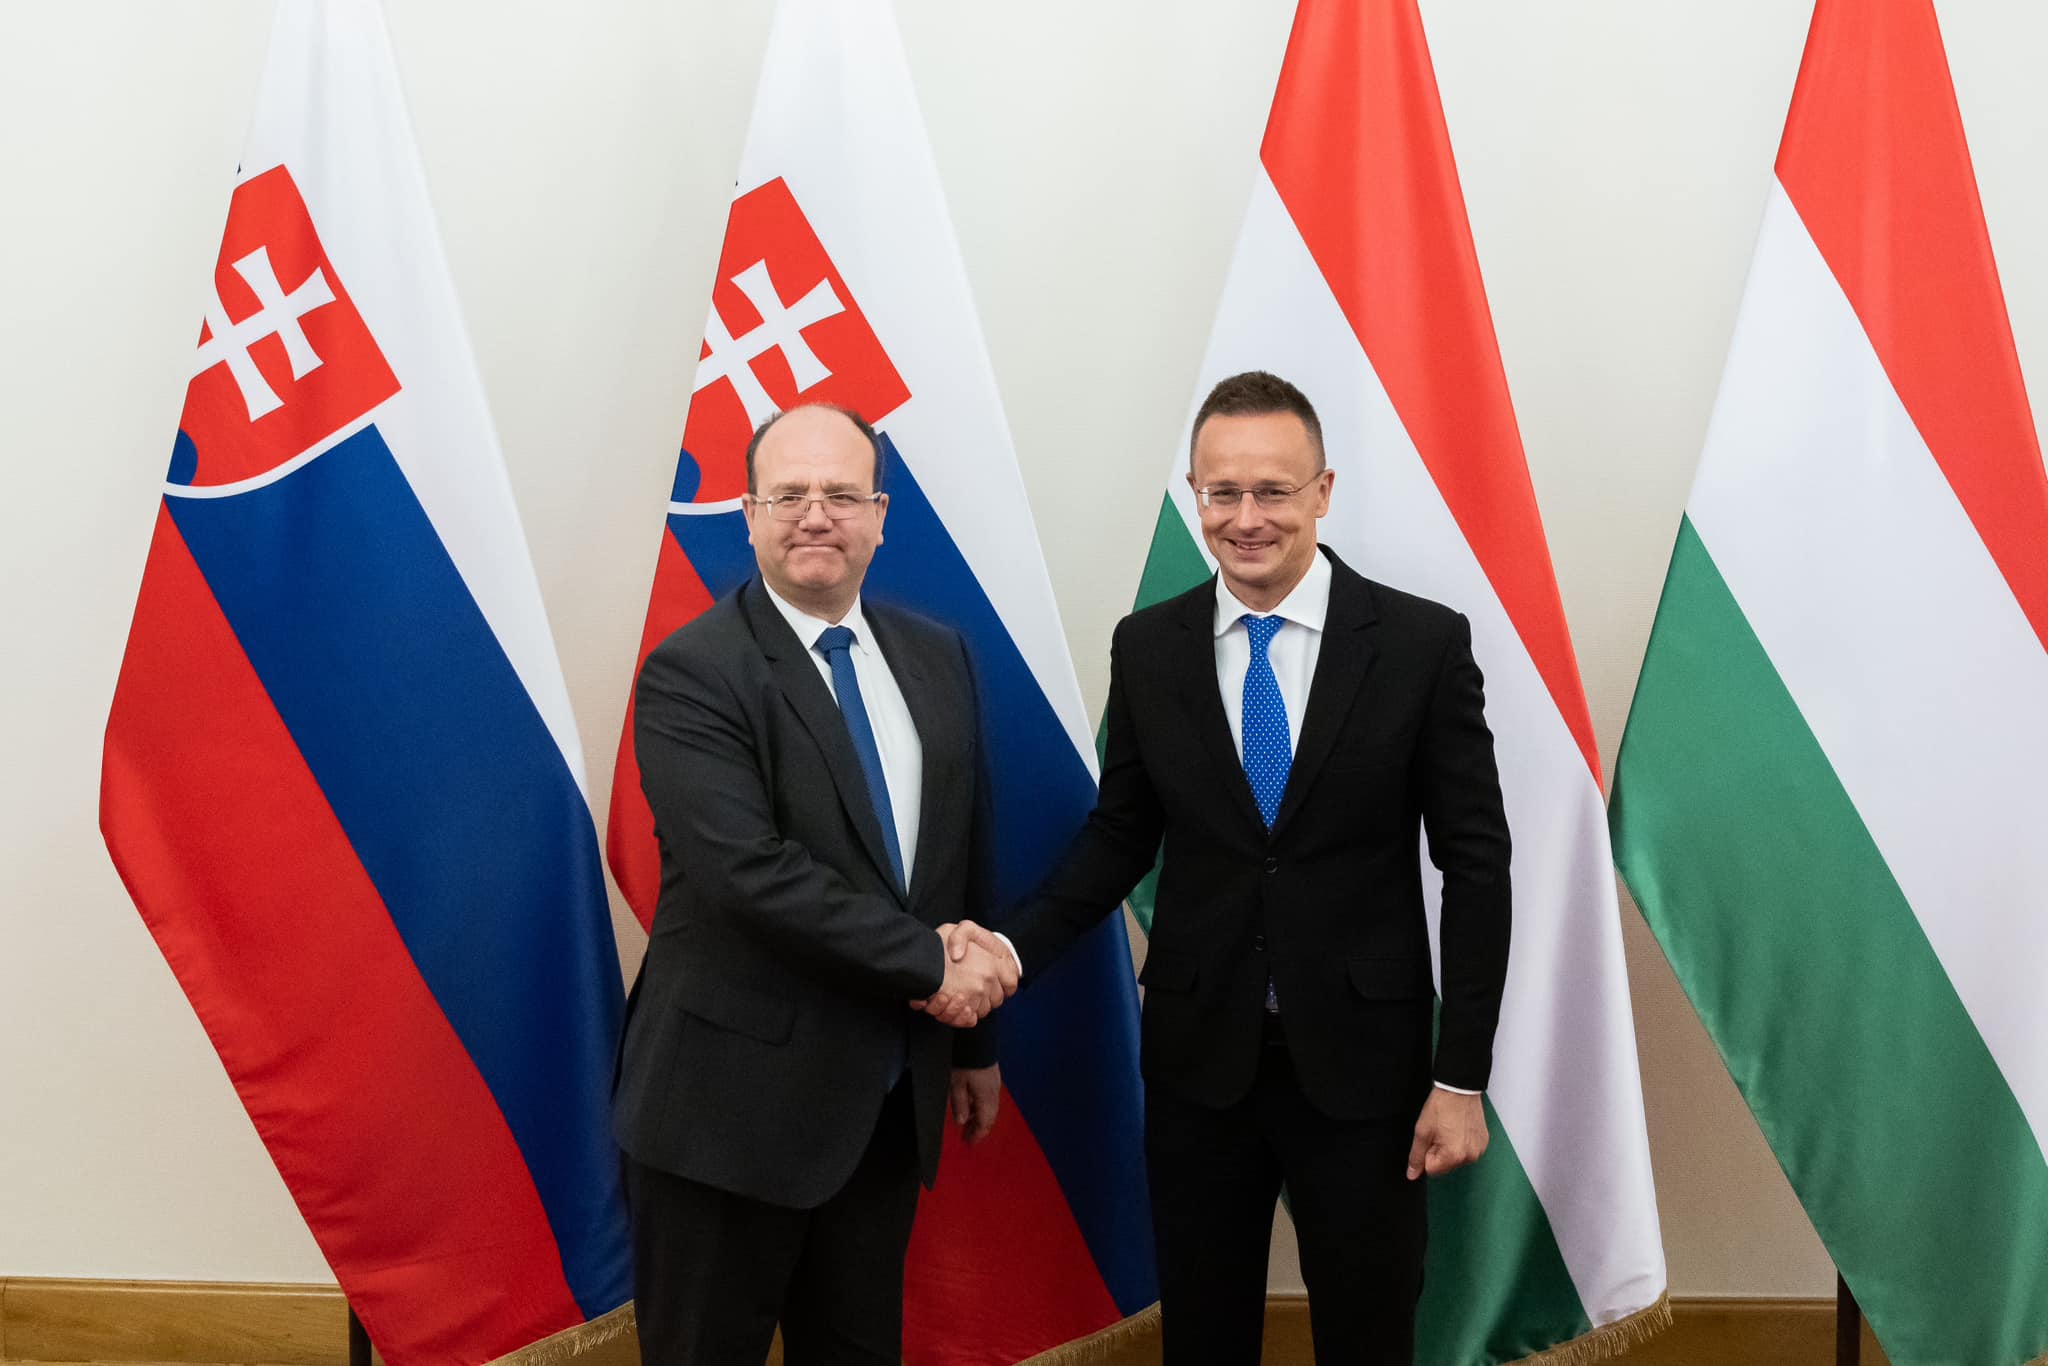 There is More That Unites Us Than Divides Us with Slovakia, Says Minister